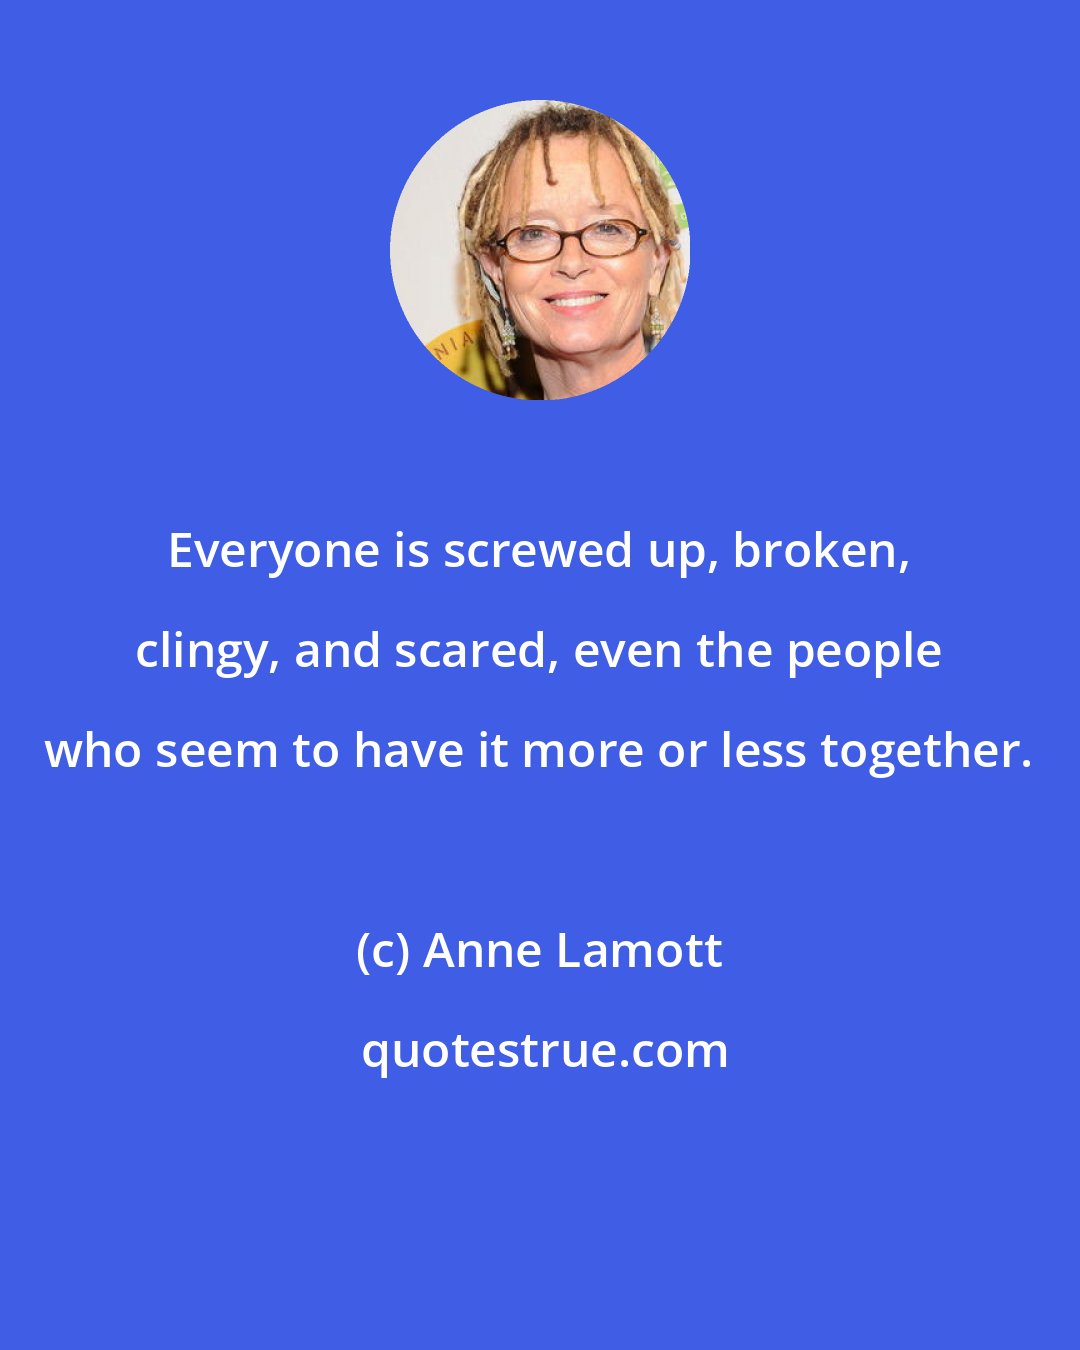 Anne Lamott: Everyone is screwed up, broken, clingy, and scared, even the people who seem to have it more or less together.